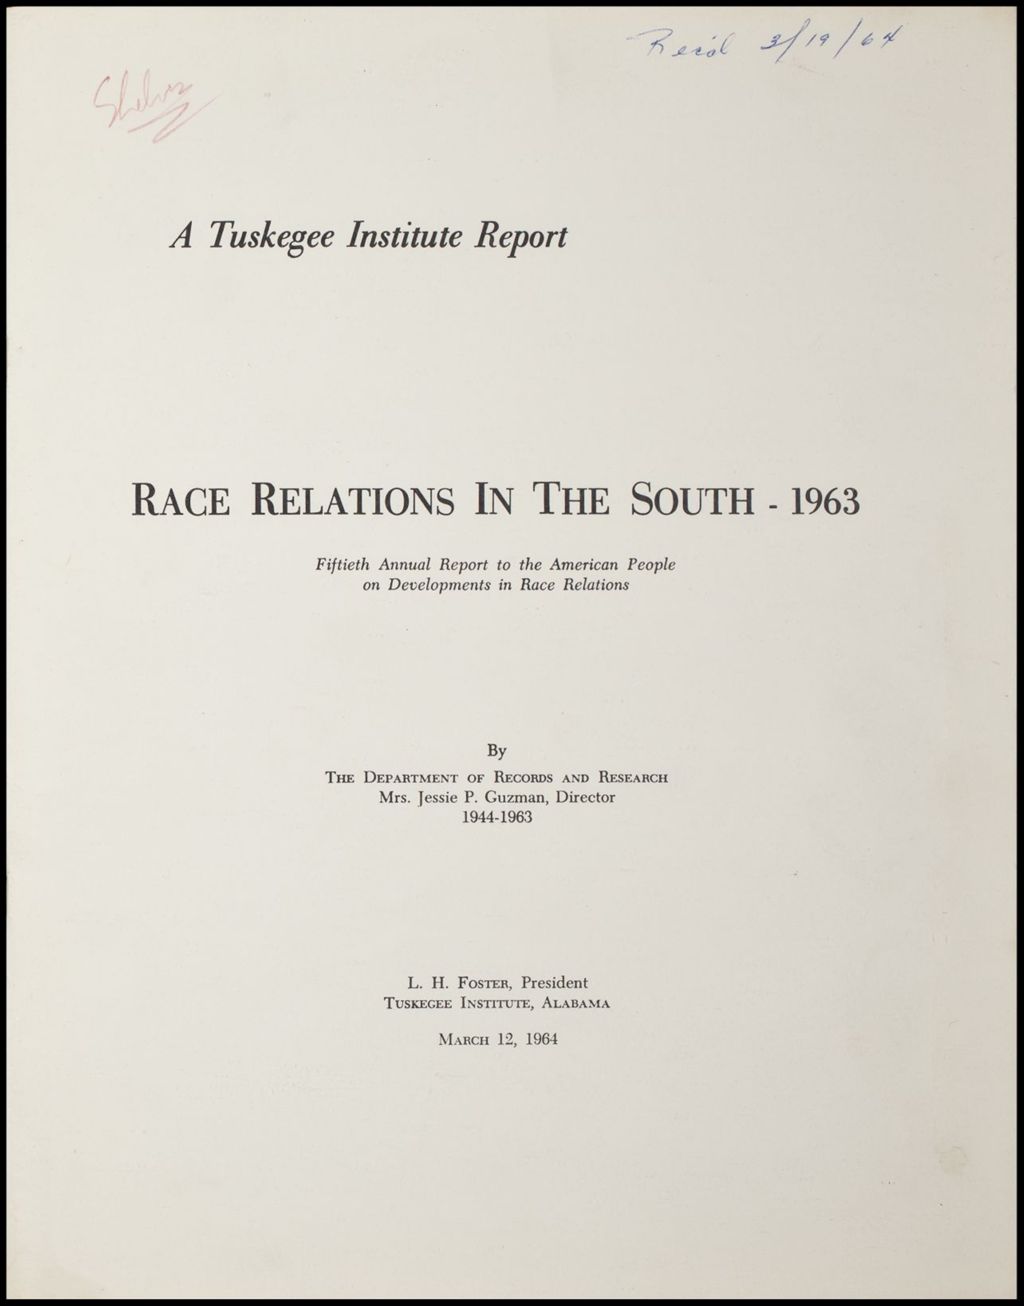 Miniature of Race Relations In the South Department of Records and Research, 1964 (Folder III-1817)